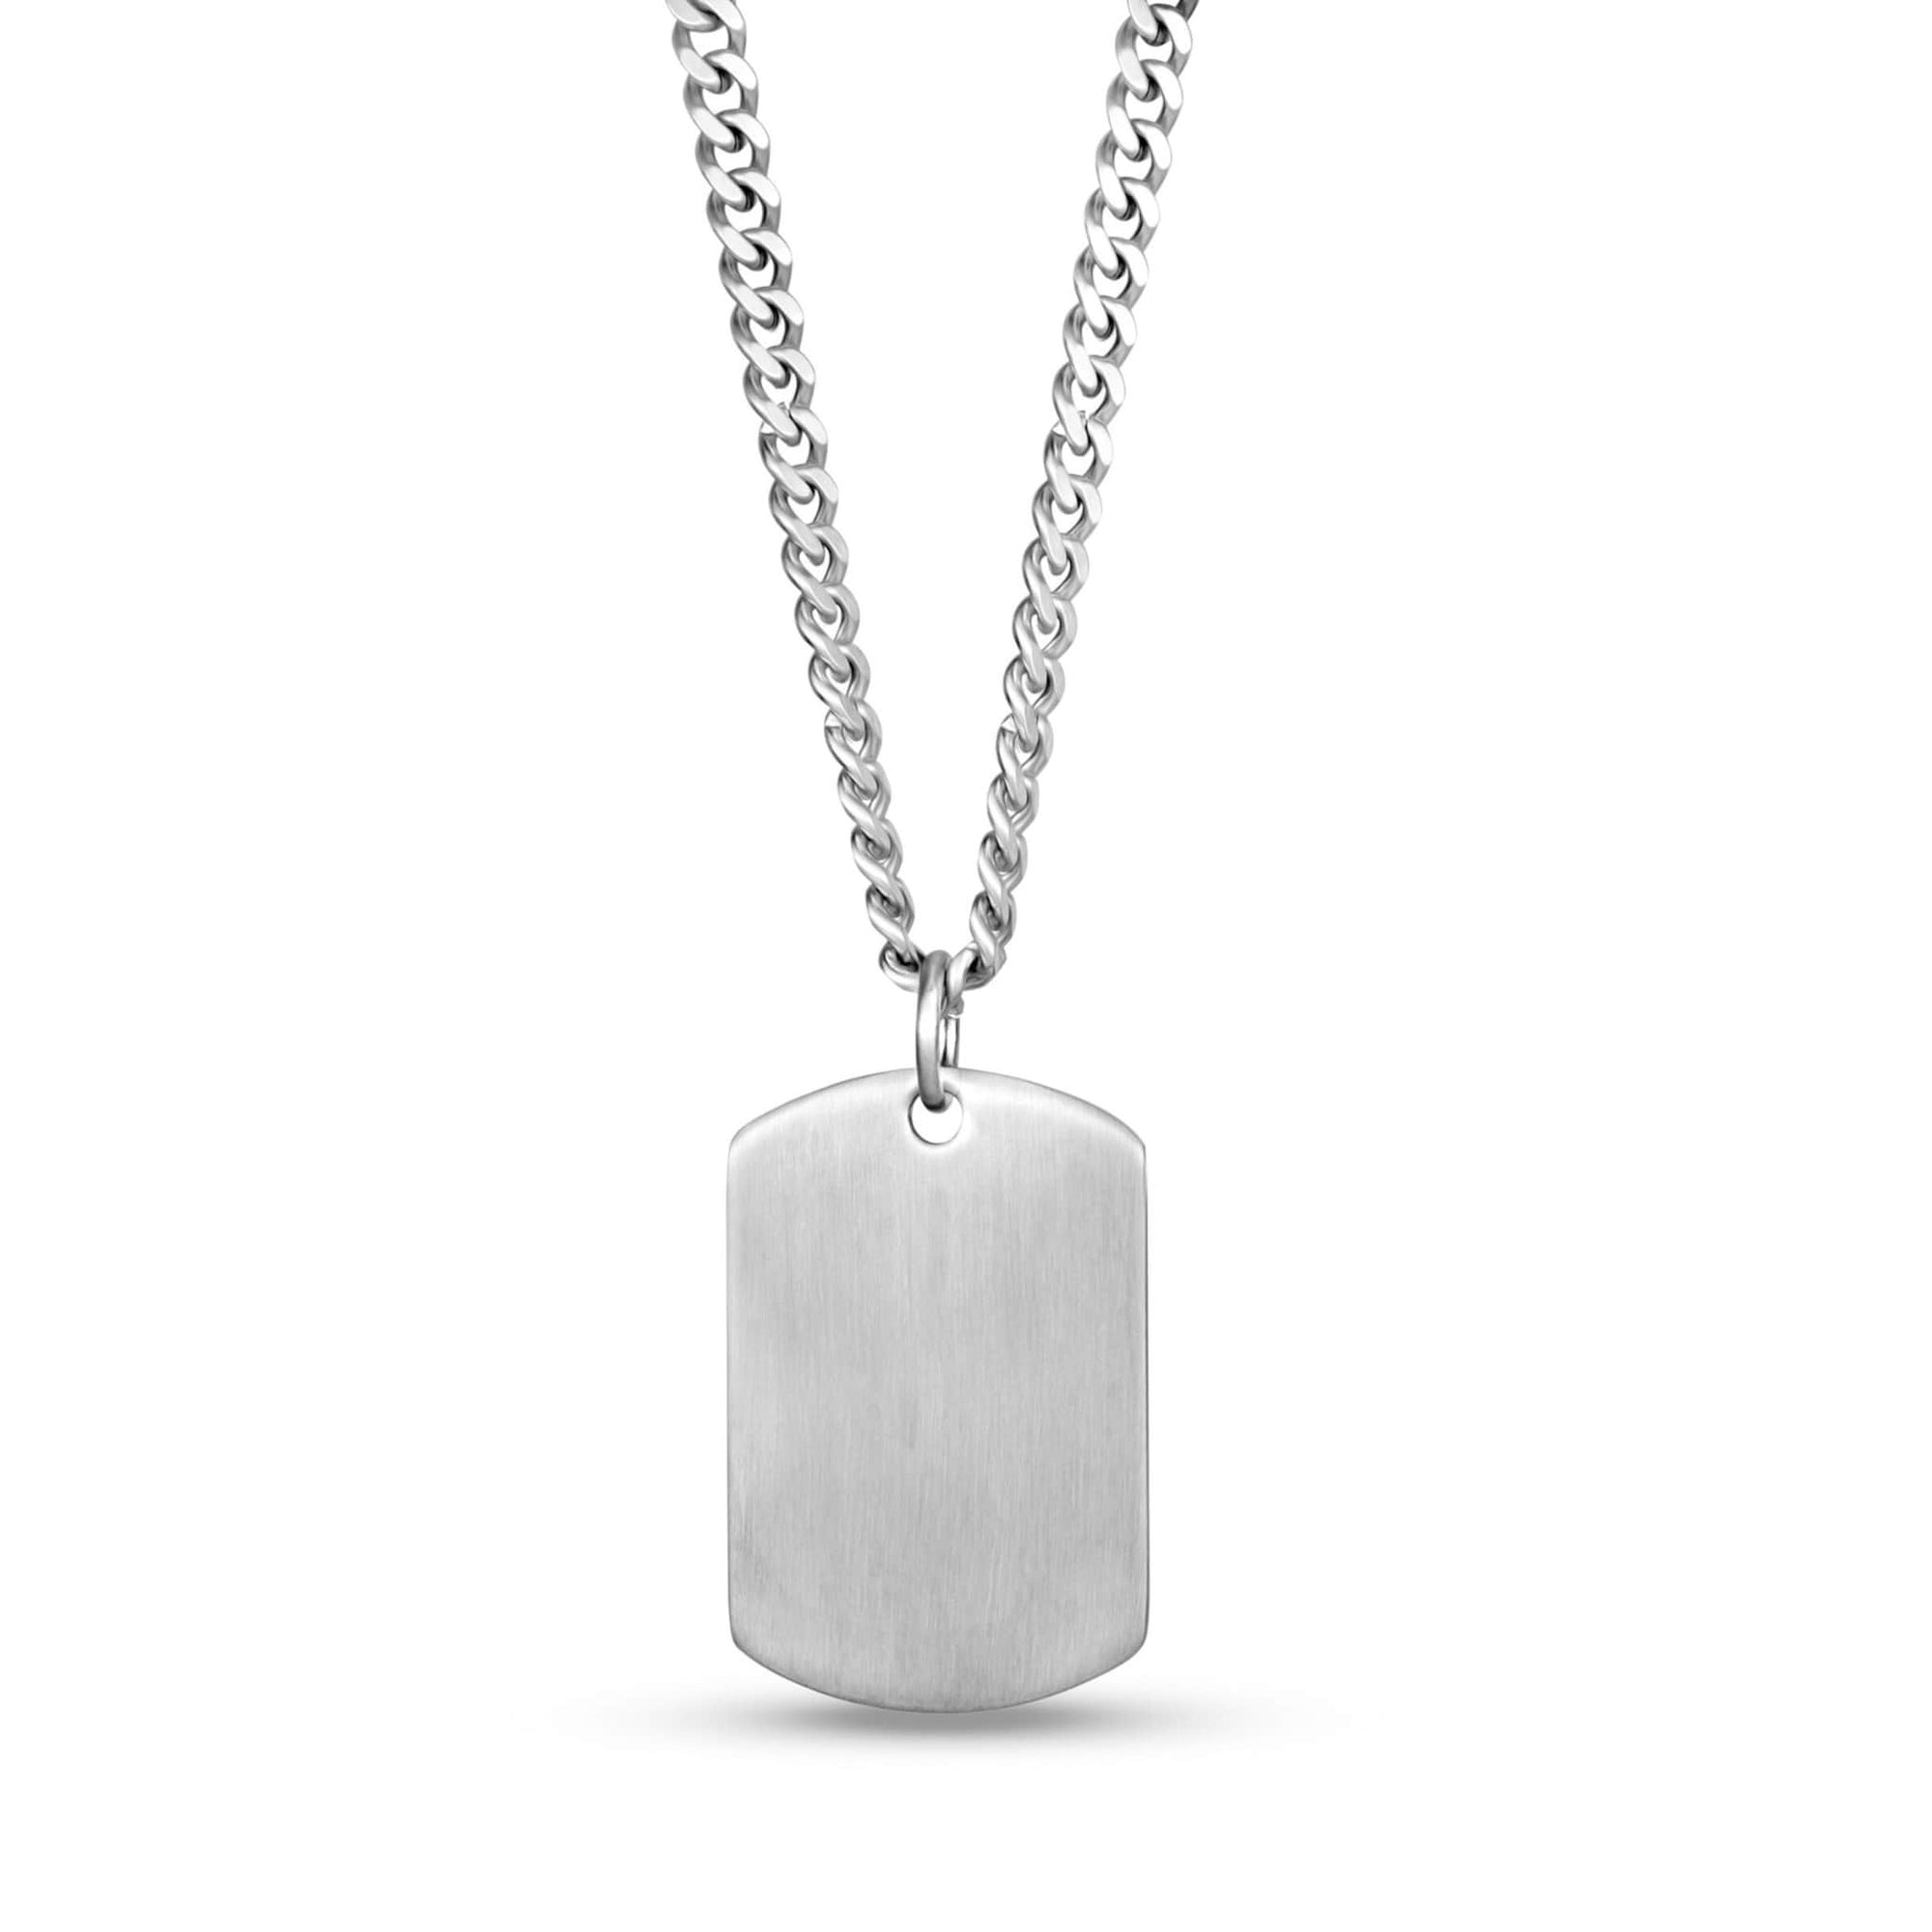 Matte Stainless Steel Dog Tag at Arman's Jewellers Kitchener